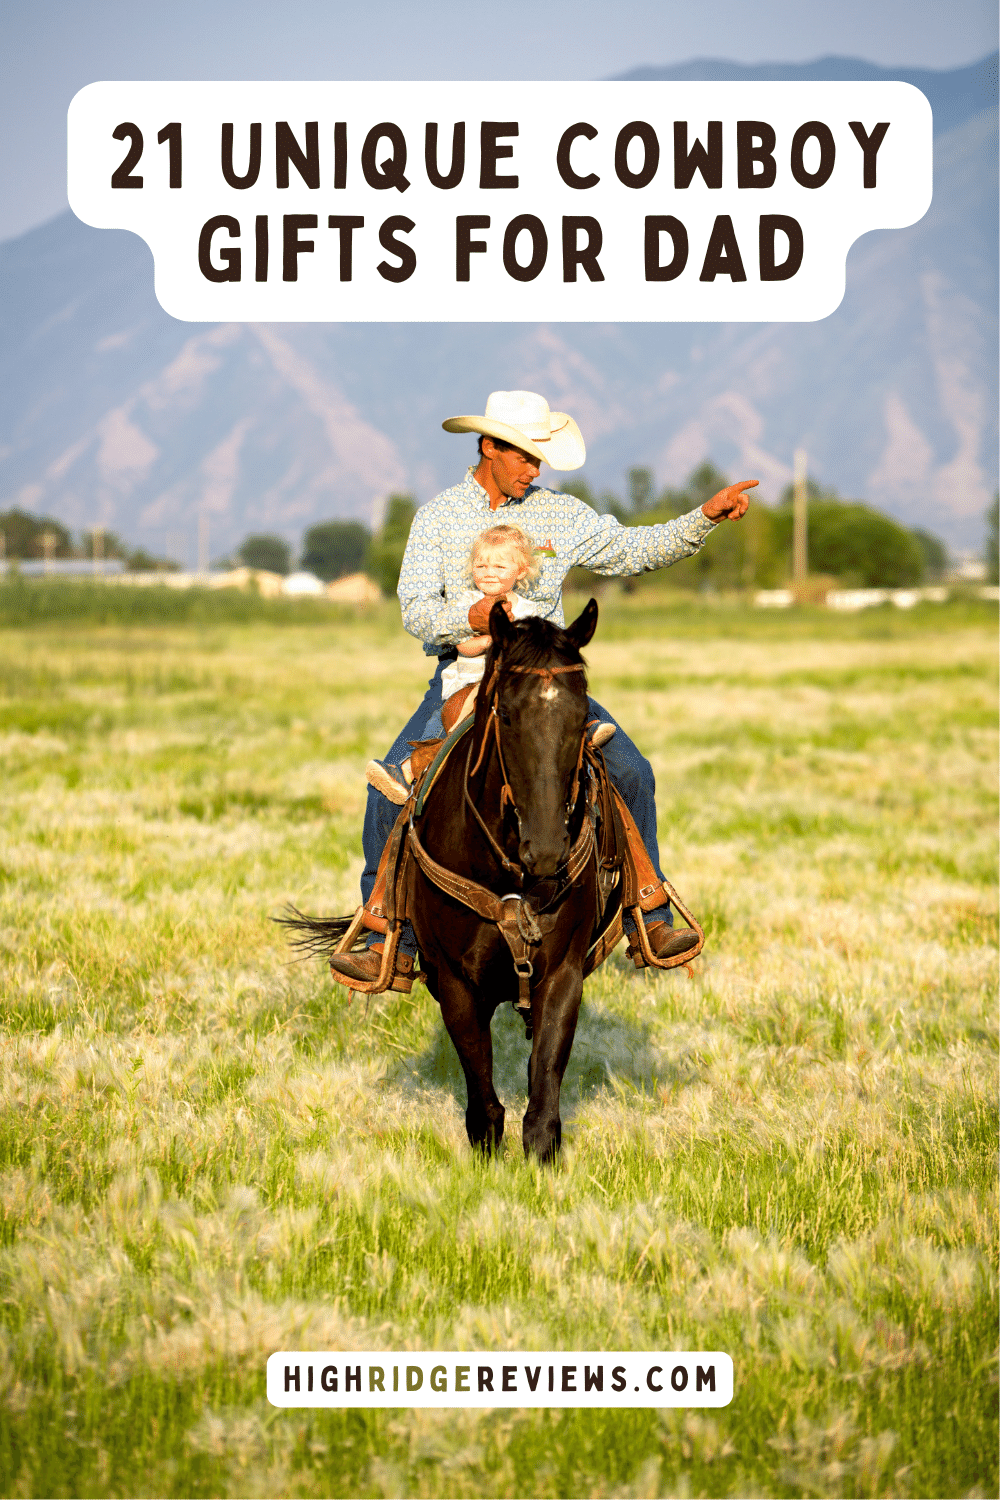 21 Unique Cowboy Gifts for Dad That'll Bring Out His Inner Buckaroo